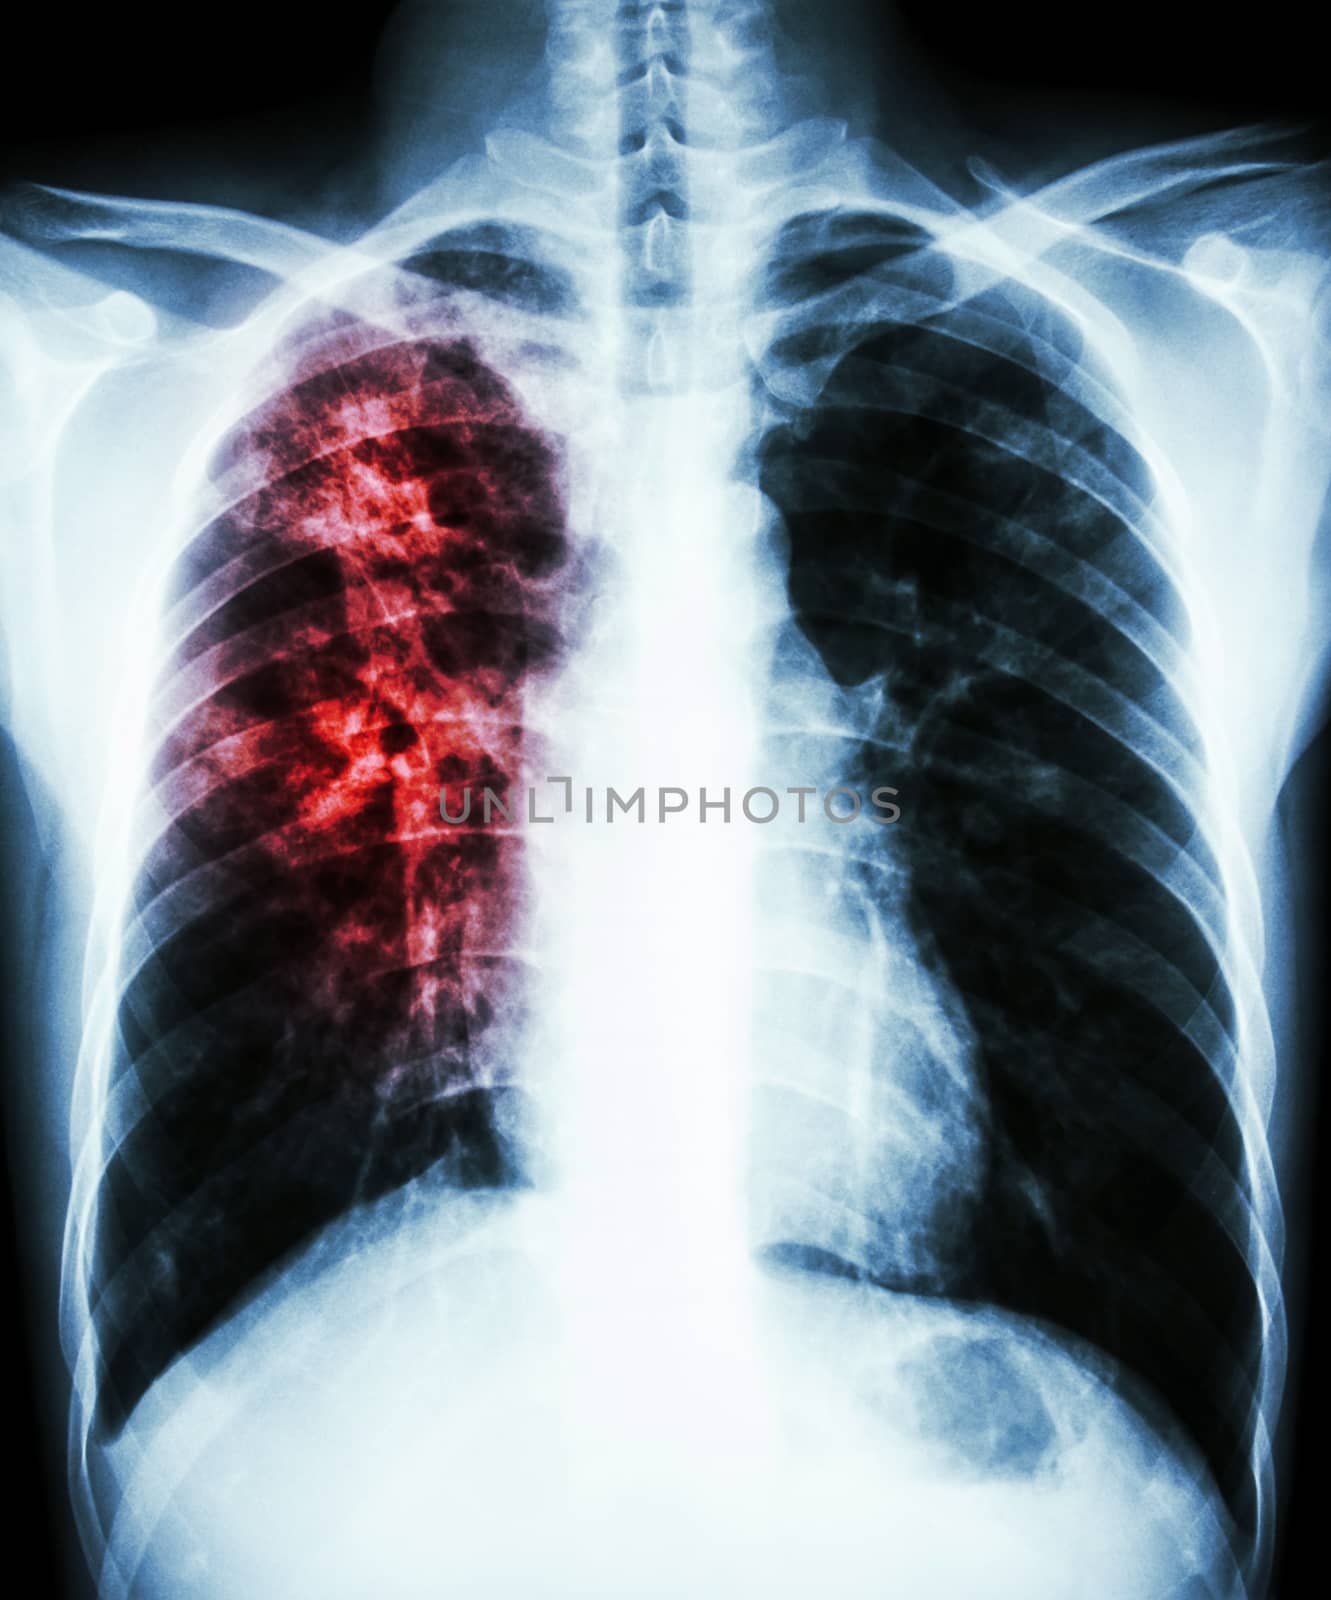 film chest x-ray PA upright : show interstitial infiltration at right lung due to mycobacterium tuberculosis infection (Pulmonary tuberculosis)